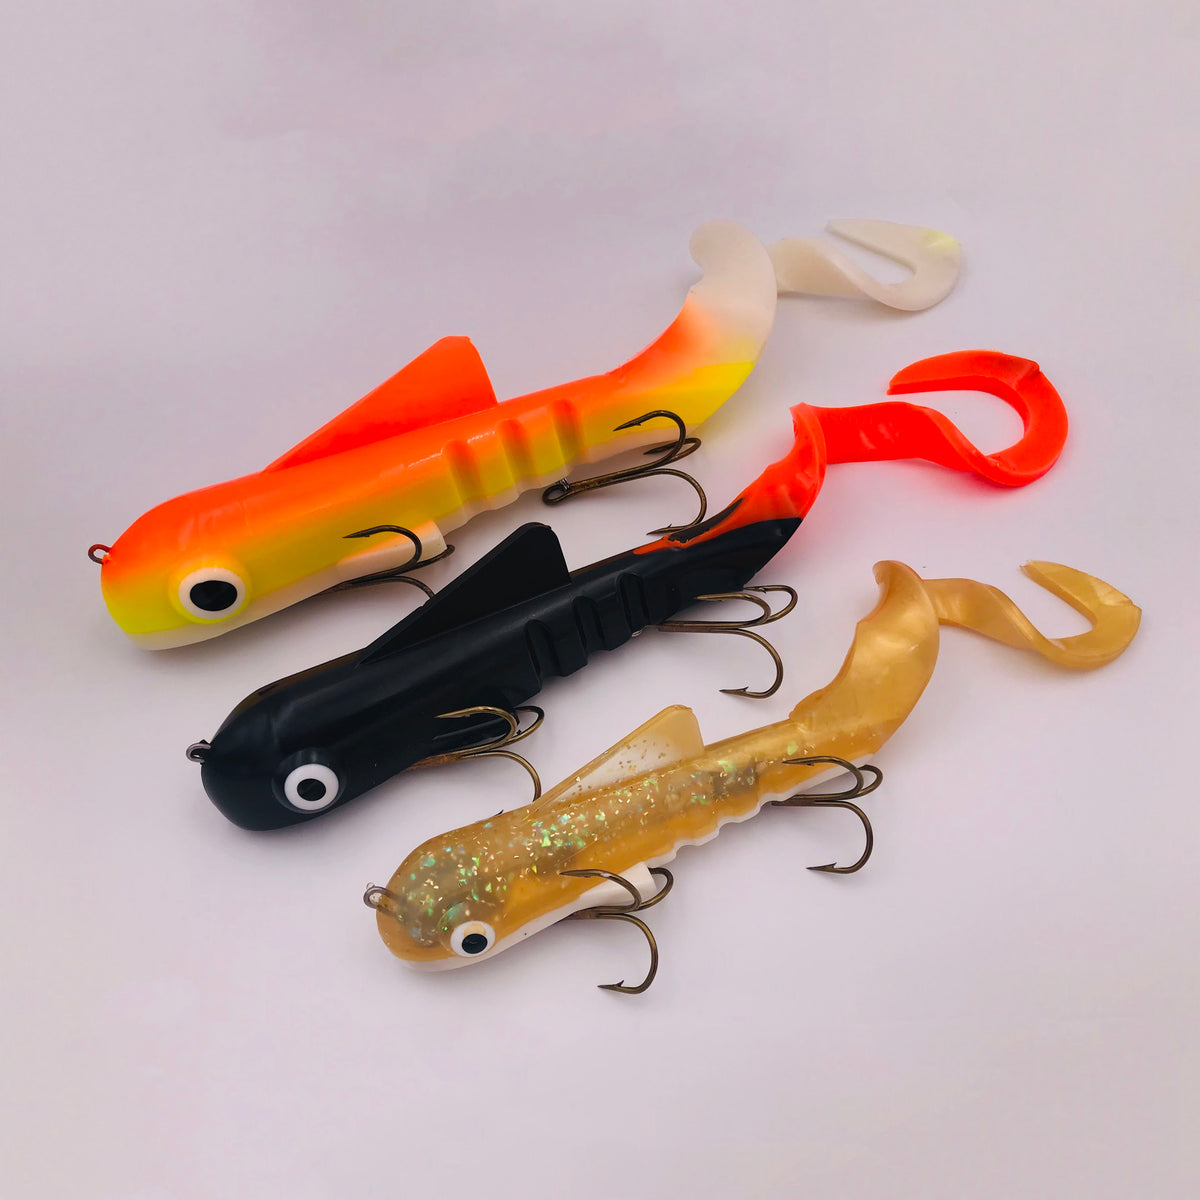 Leo Lure-Musky Dawg-Jointed-6.5-Color Brown TroutLEO-MUSKY DAWG